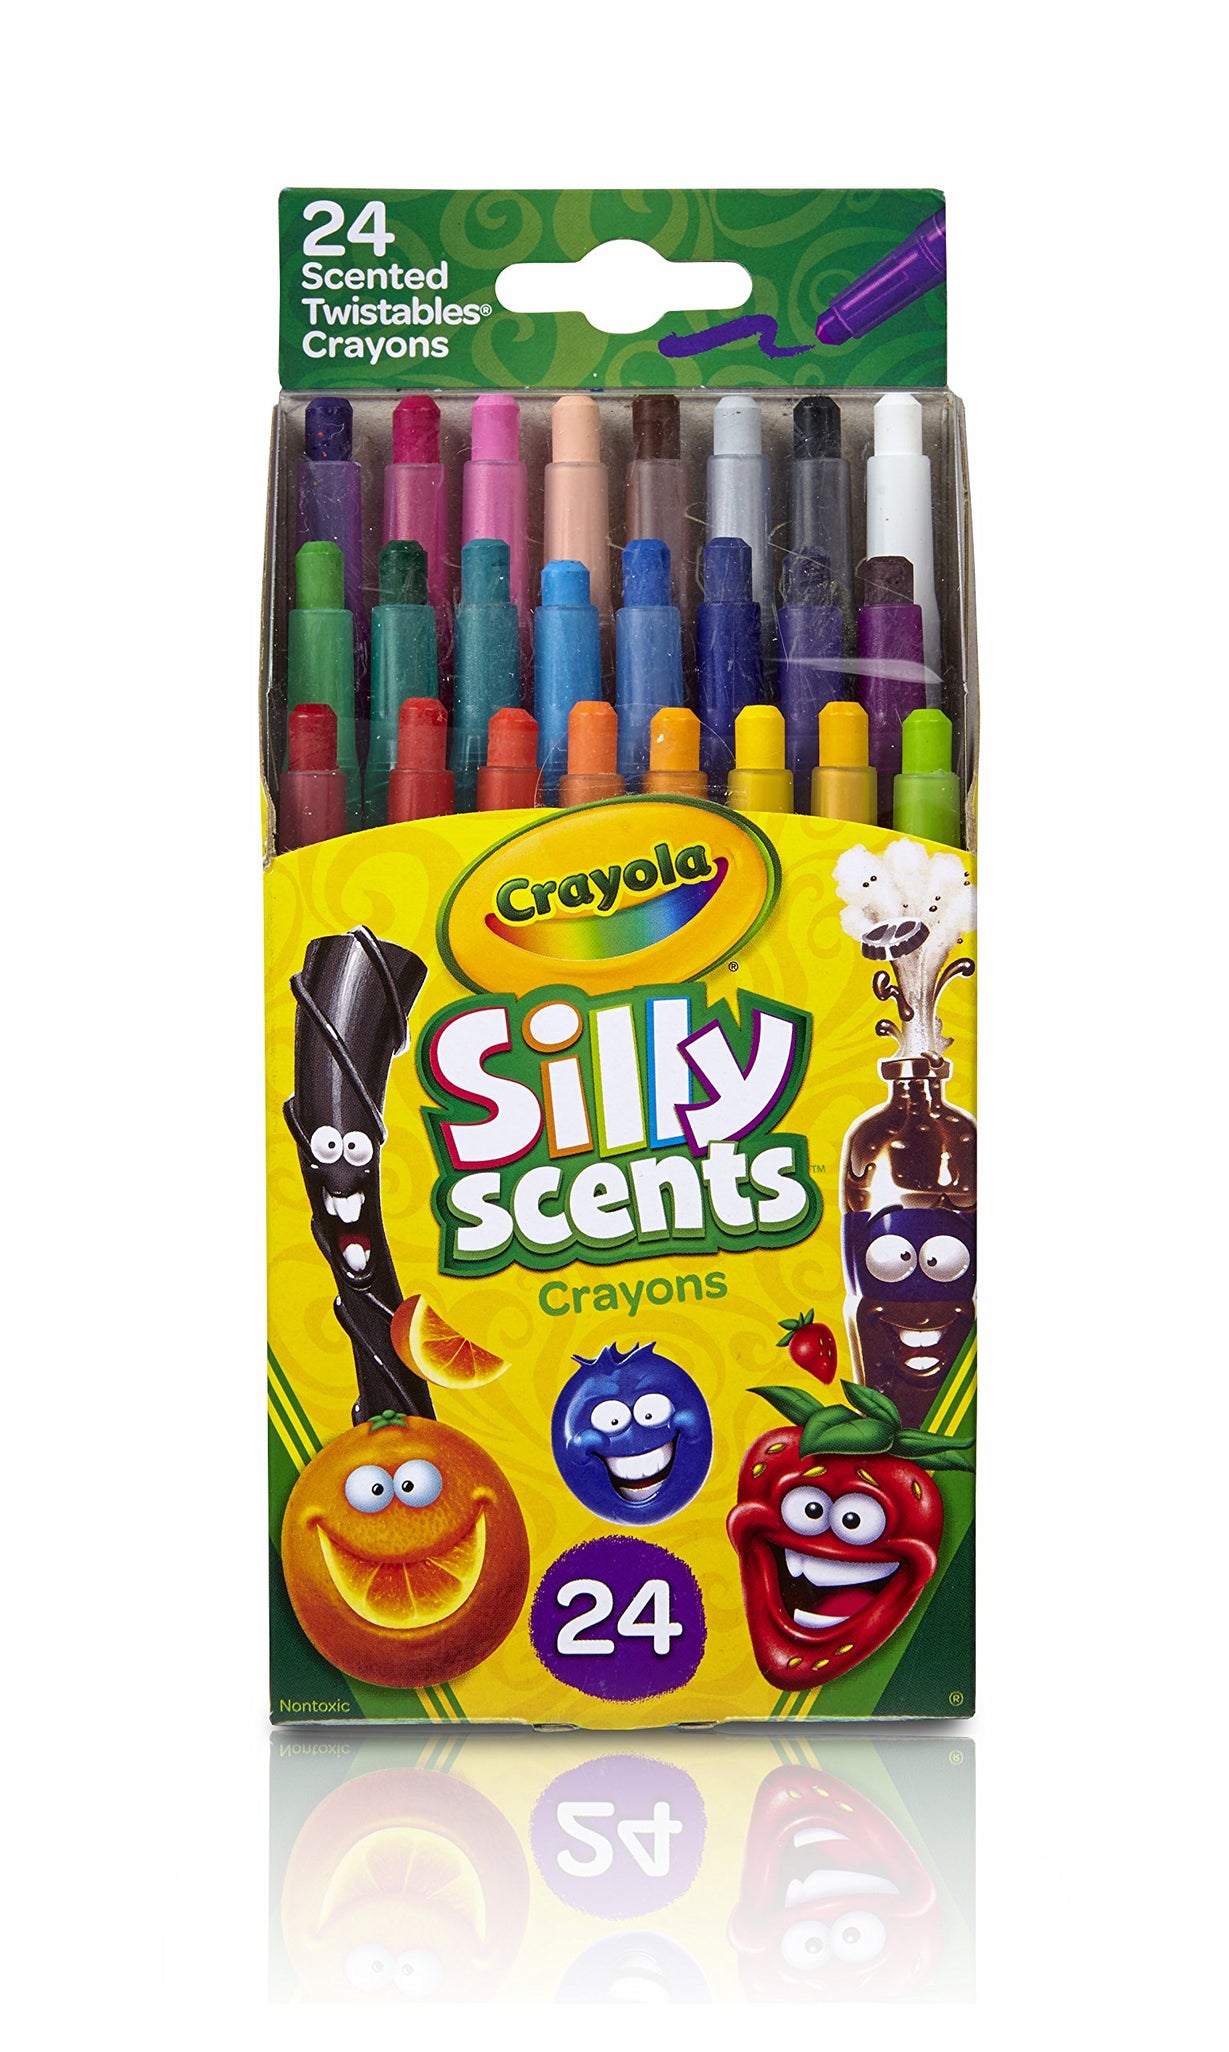 Crayola Silly Scents Twistables Crayons, Sweet Scented Crayons, 24 Count (Package may vary)